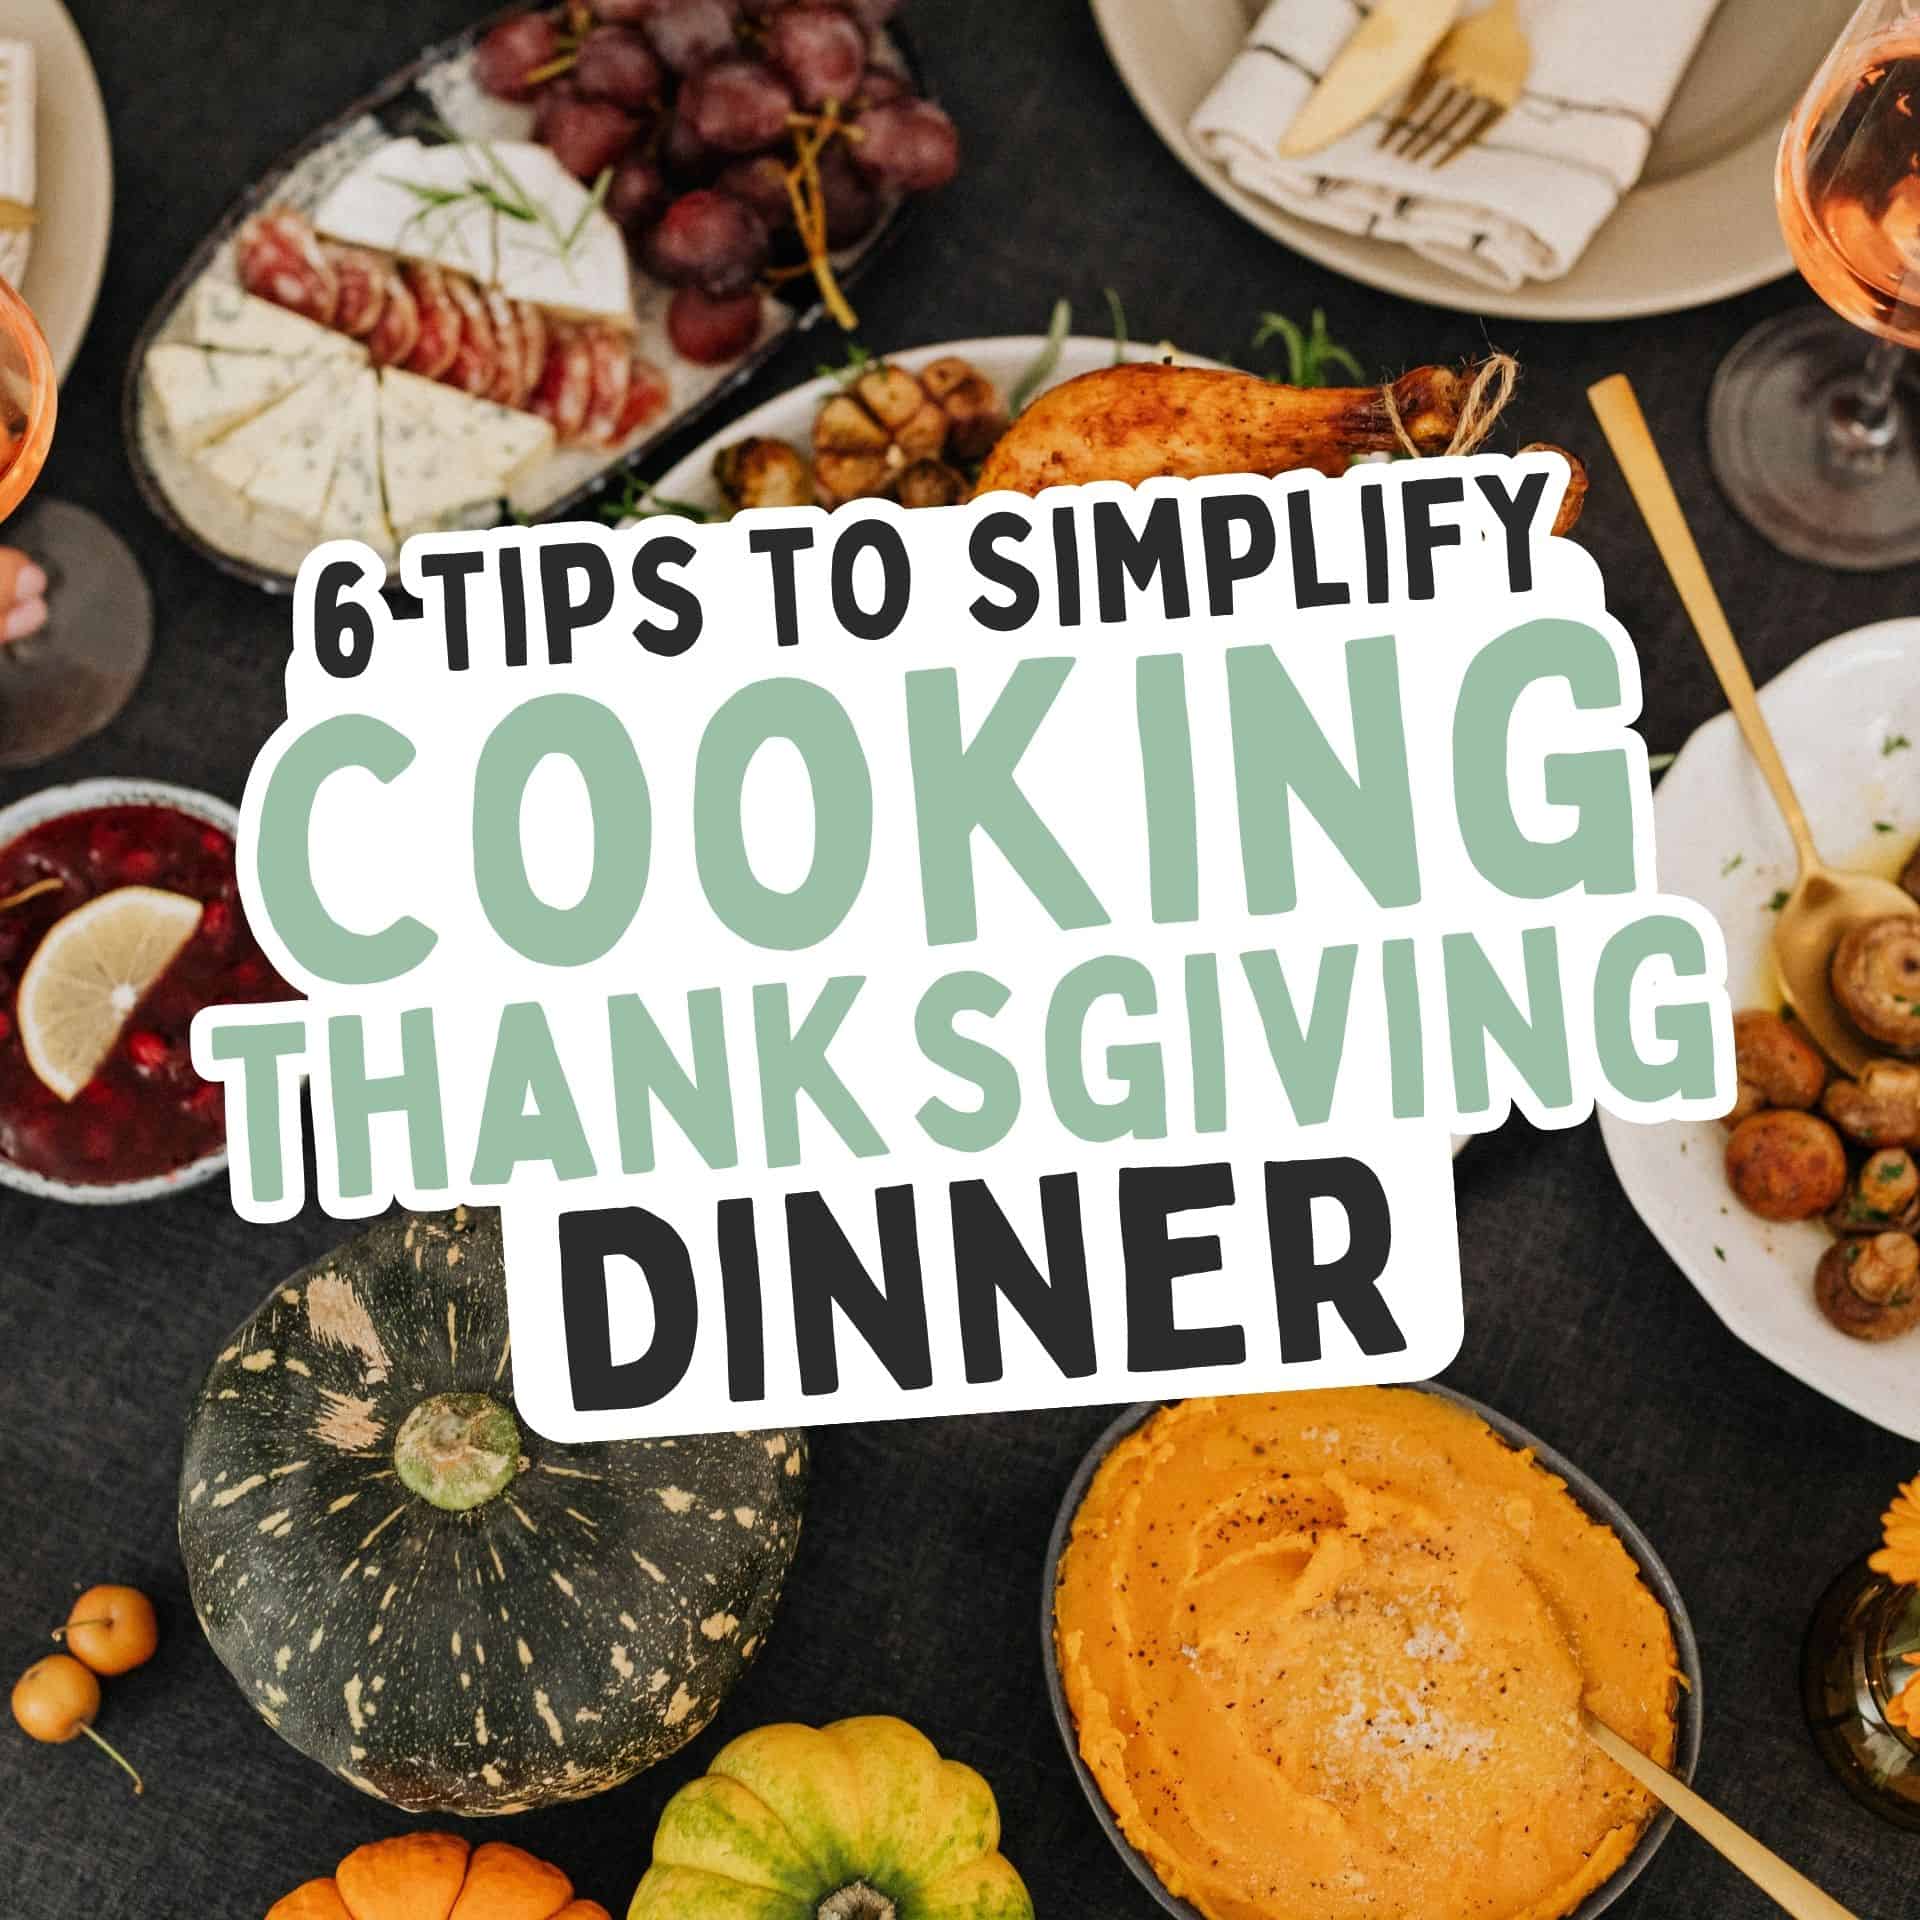 Thanksgiving Cooking Tips - 6 Tips to Simplify Cooking Thanksgiving Dinner